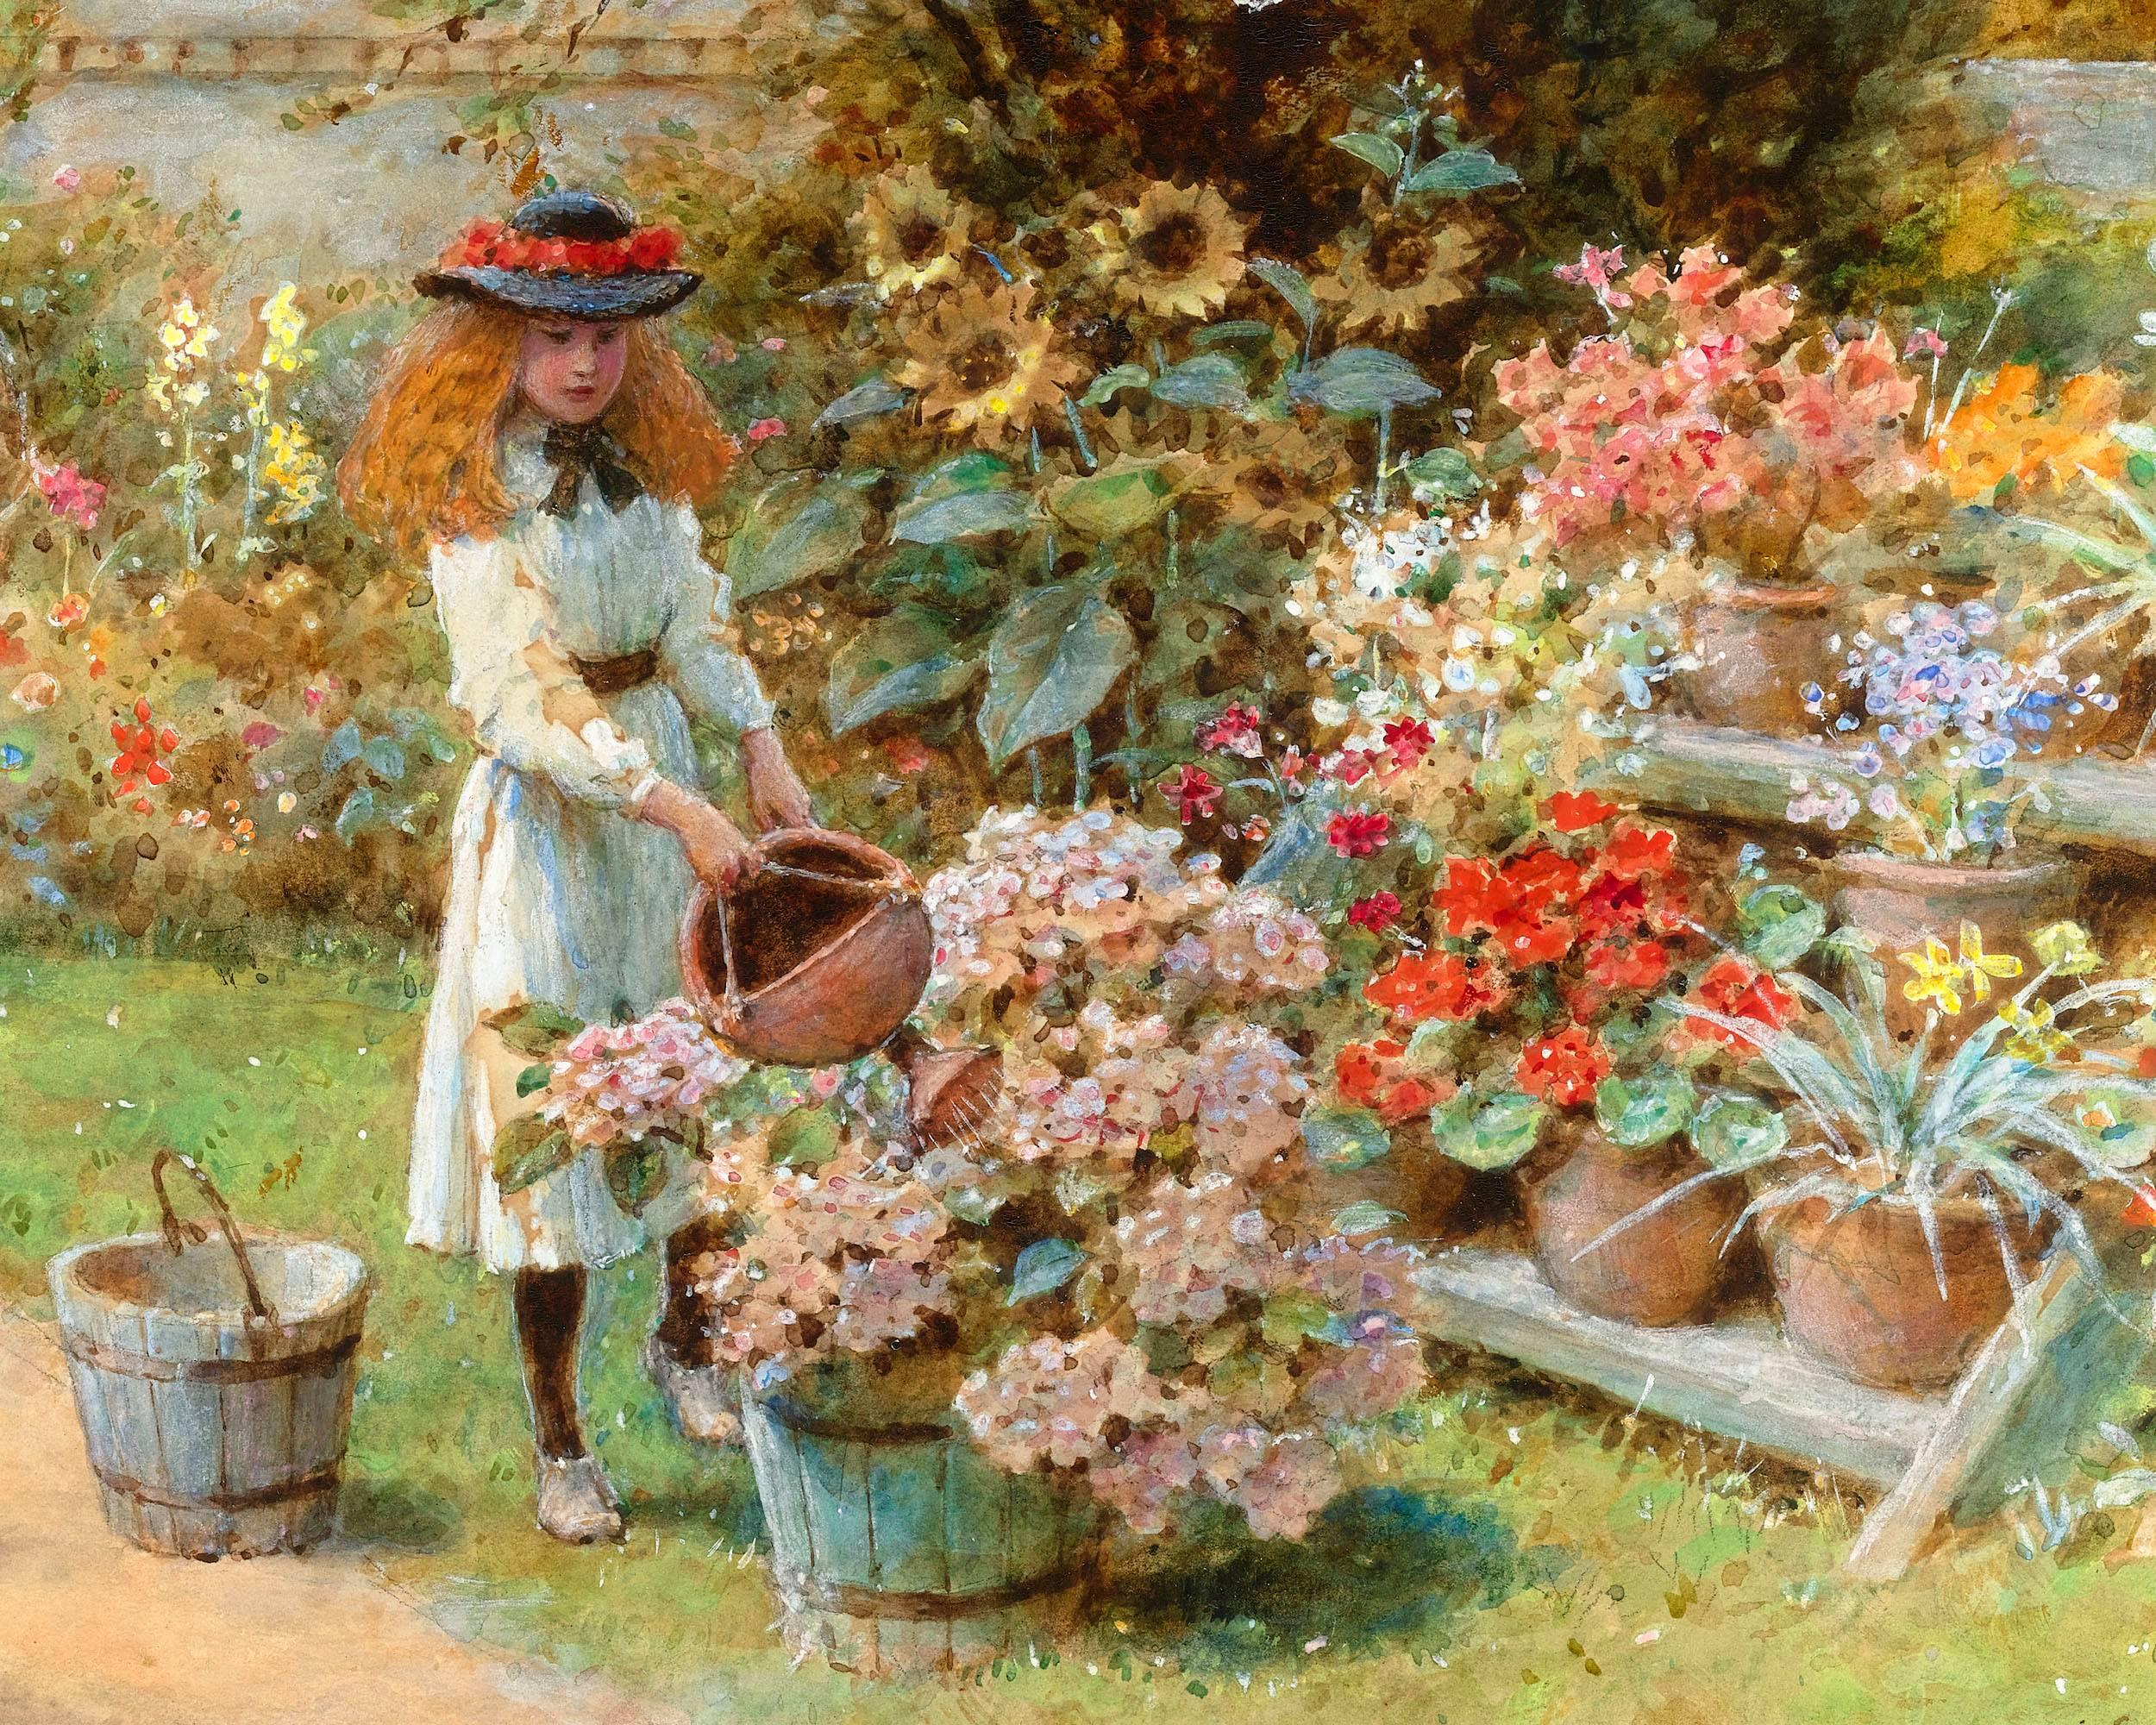 William Stephen Coleman
1829-1904 British

Picking waterlilies and the young gardeners

Each signed “WS Coleman” (lower right)
Watercolor and bodycolor on paper

An important pair of watercolors by English academic, classical artist and